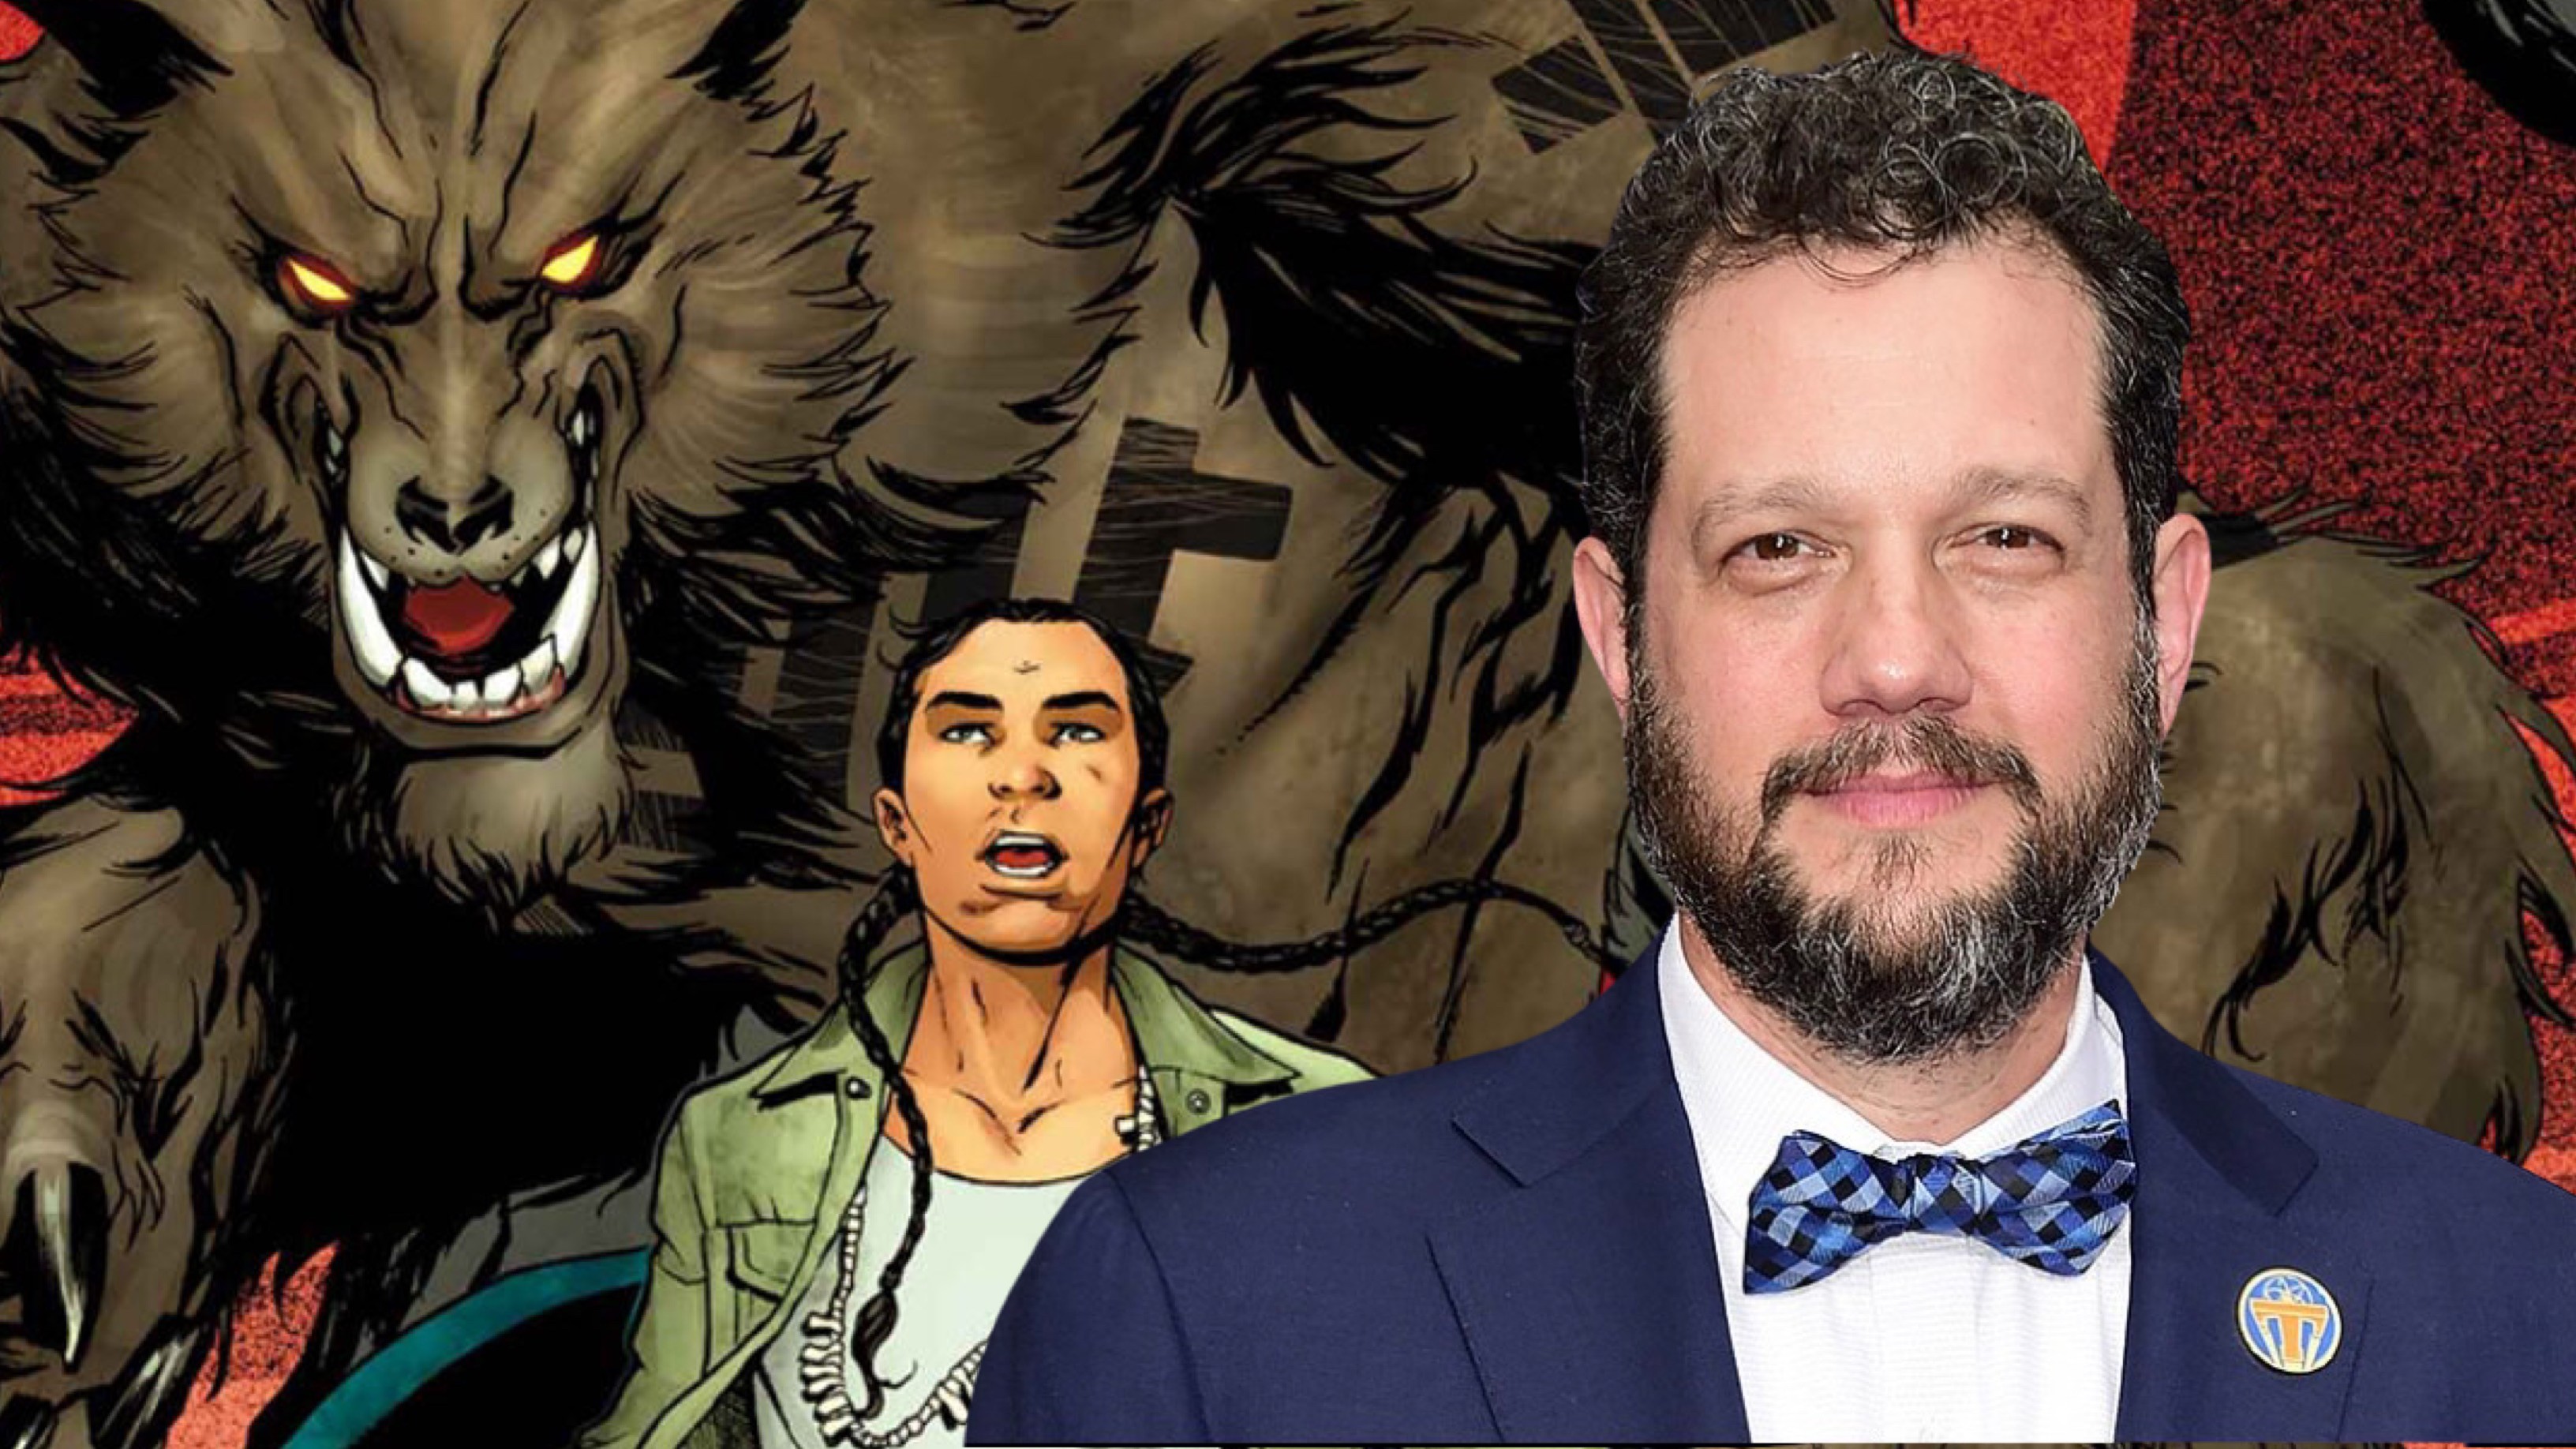 Composer Michael Giacchino Rumored to Direct a Marvel Project